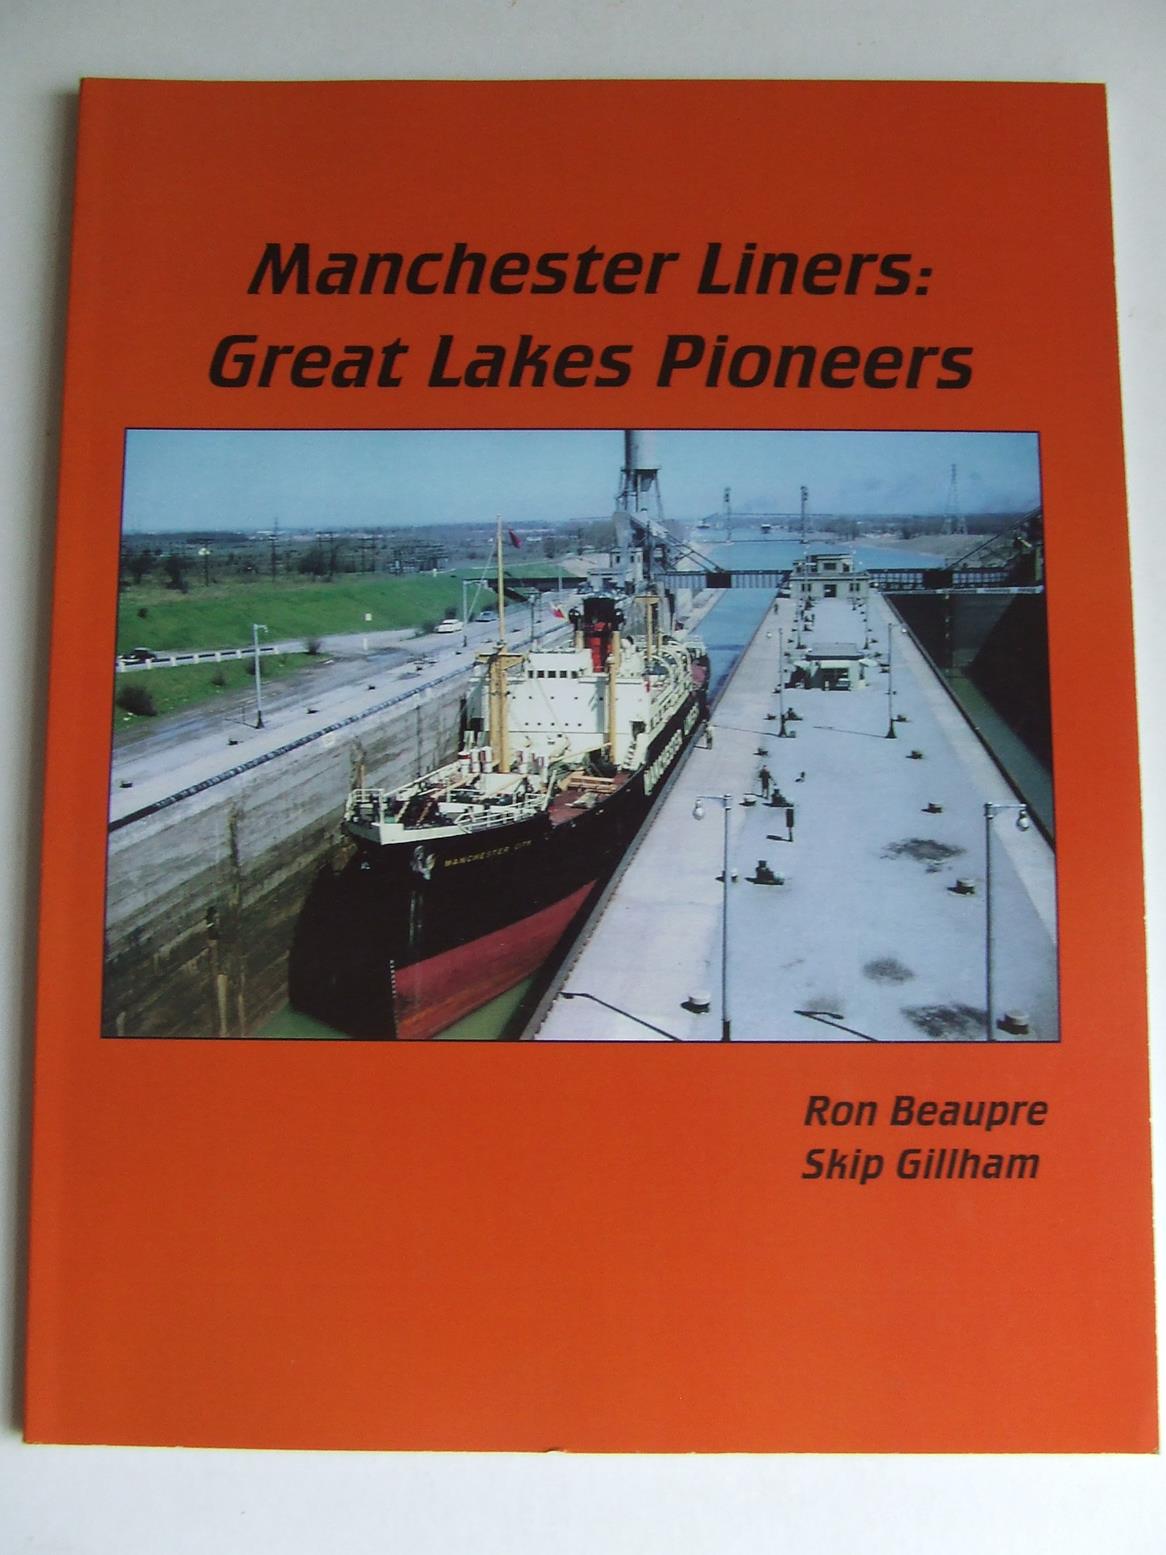 Manchester Liners: Great Lakes pioneers